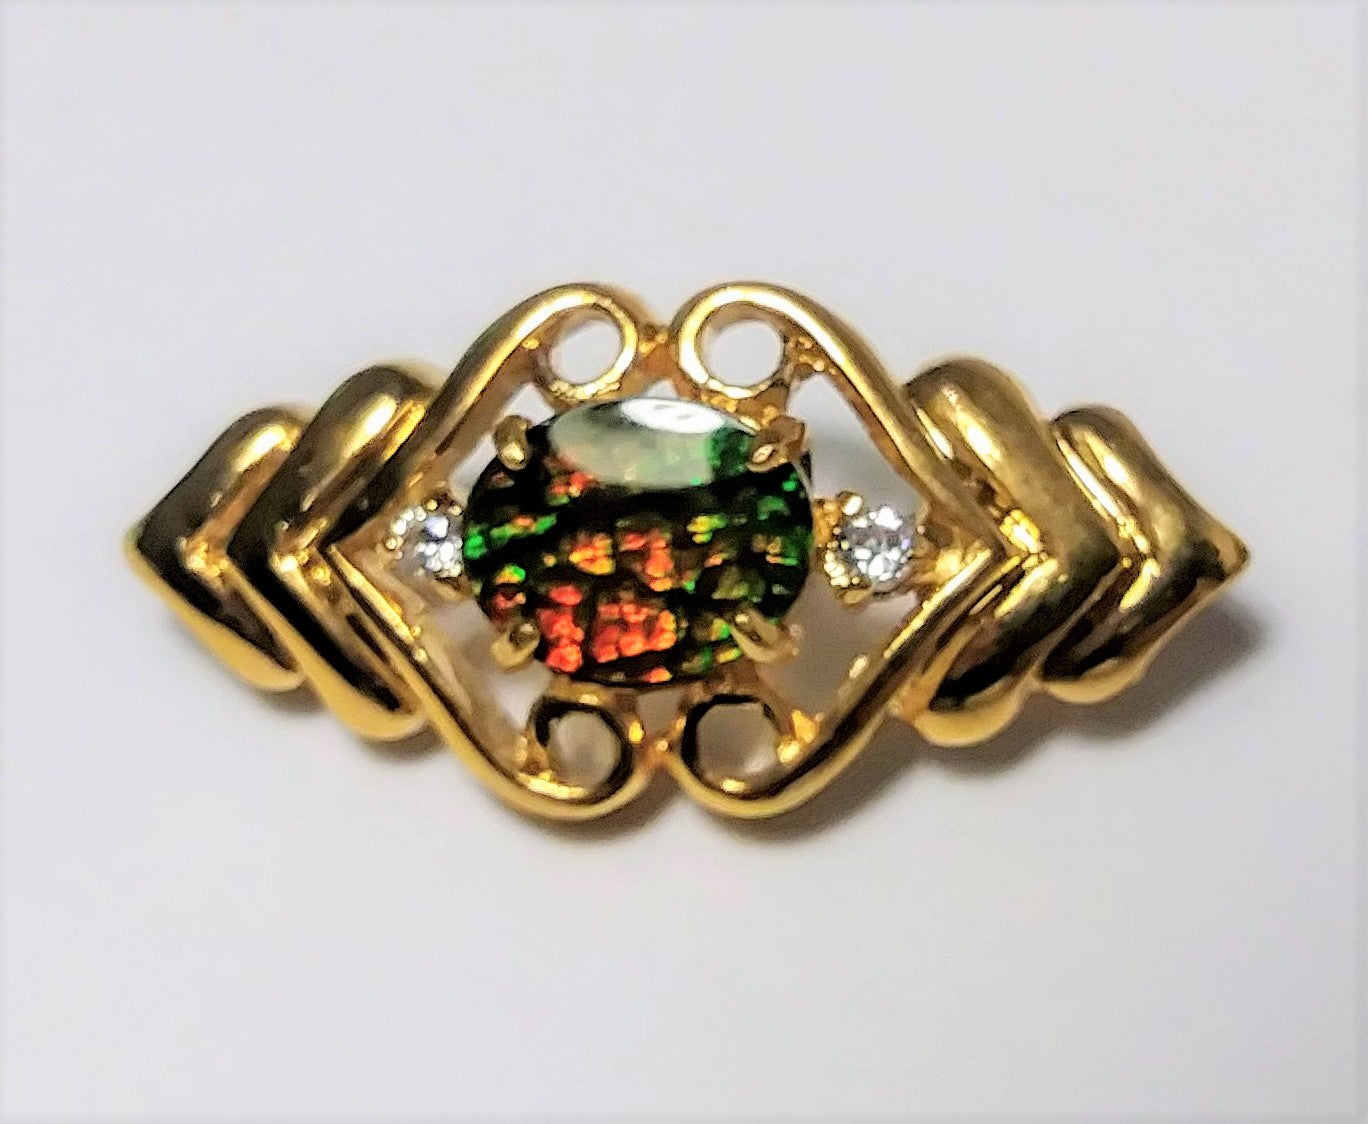 10K gold plated brooch pin with beautiful opal center piece